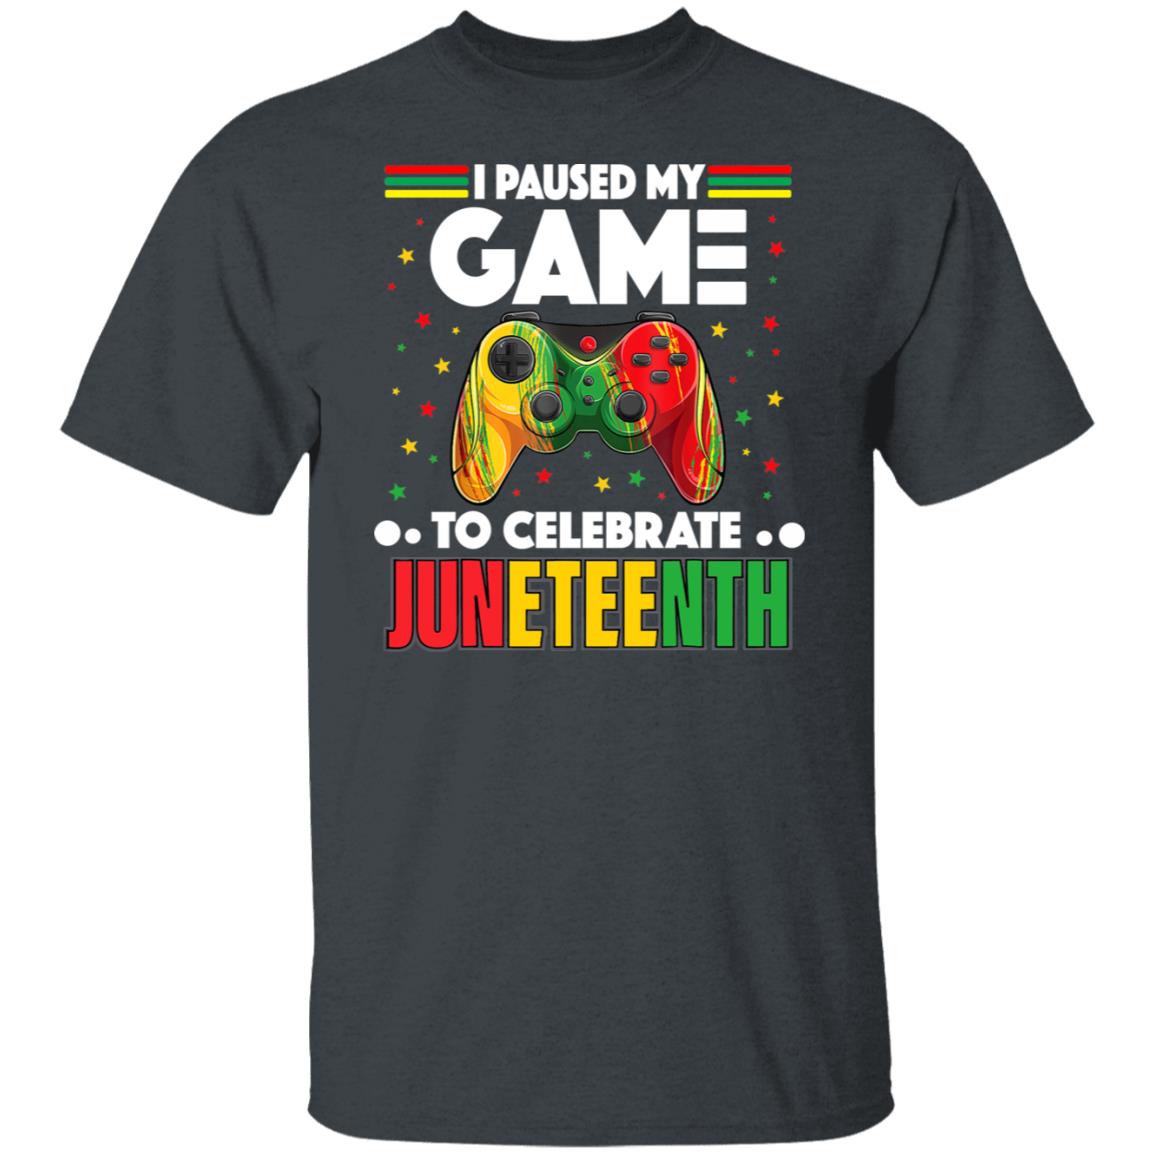 Juneteenth Gamer Tee I Paused My Game To Celebrate Juneteenth Gift Shirt